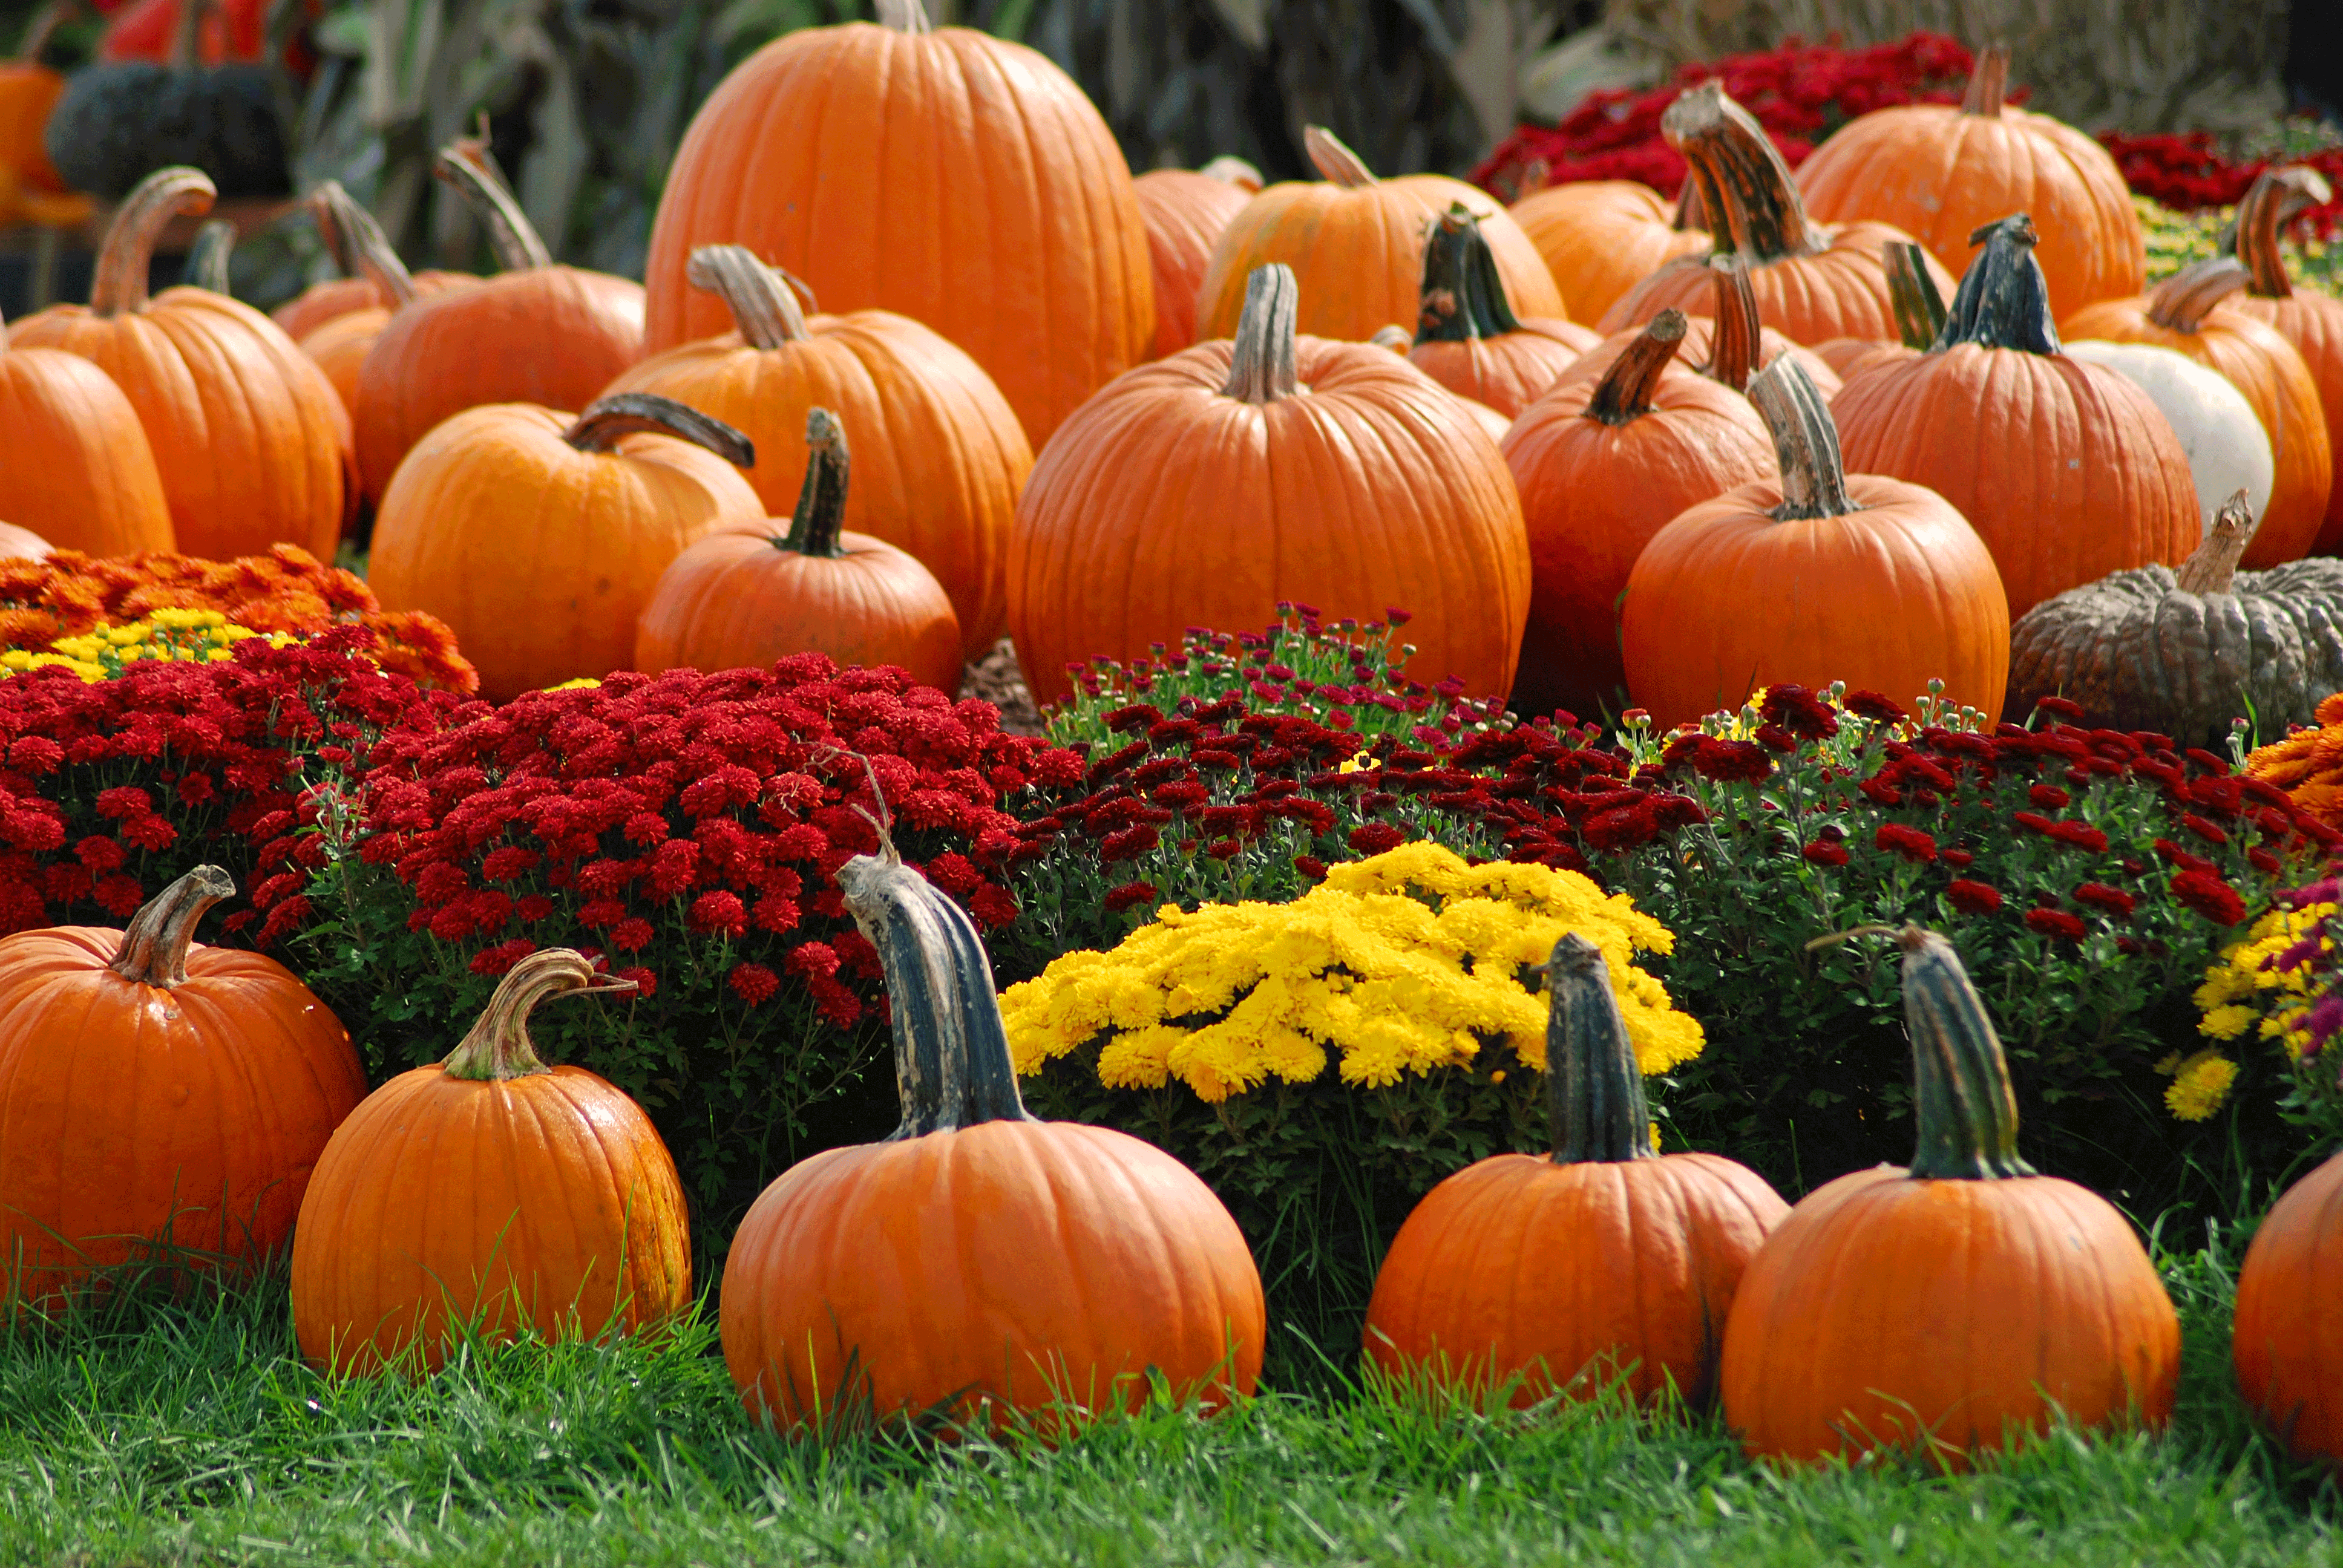 Ing Gallery For Fall Scenery With Pumpkins